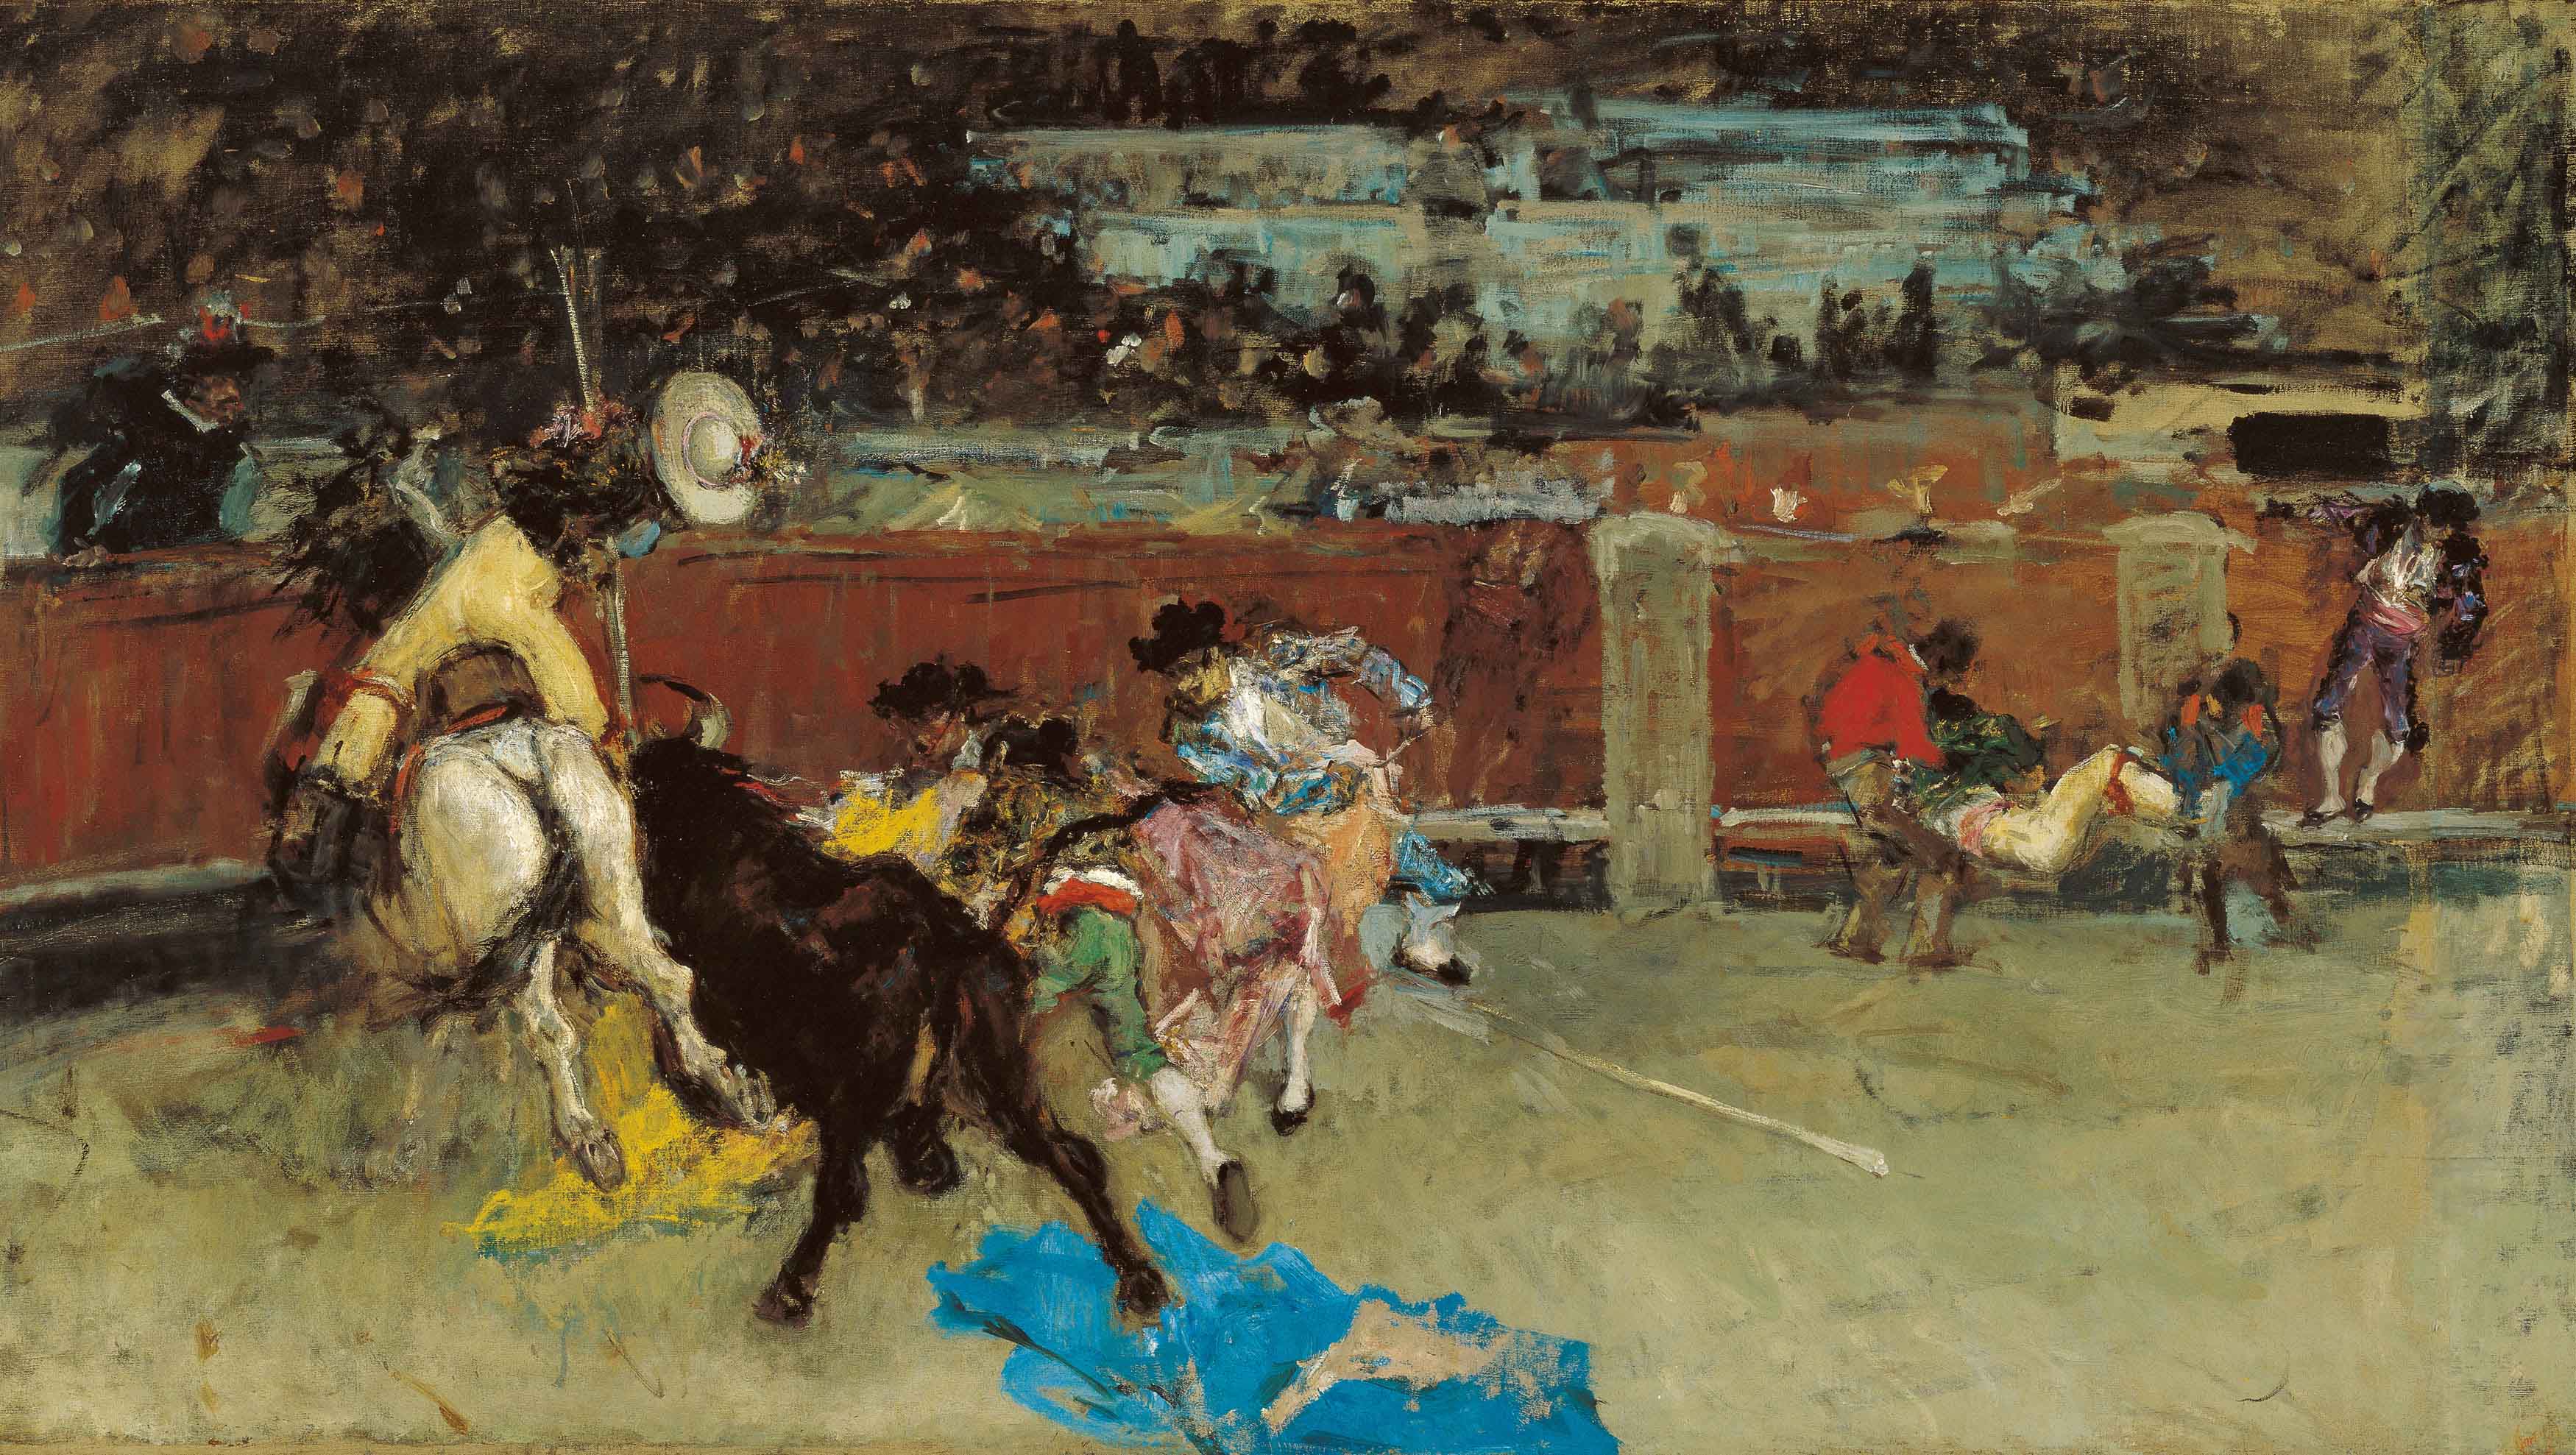 Bullfight Wounded Picador